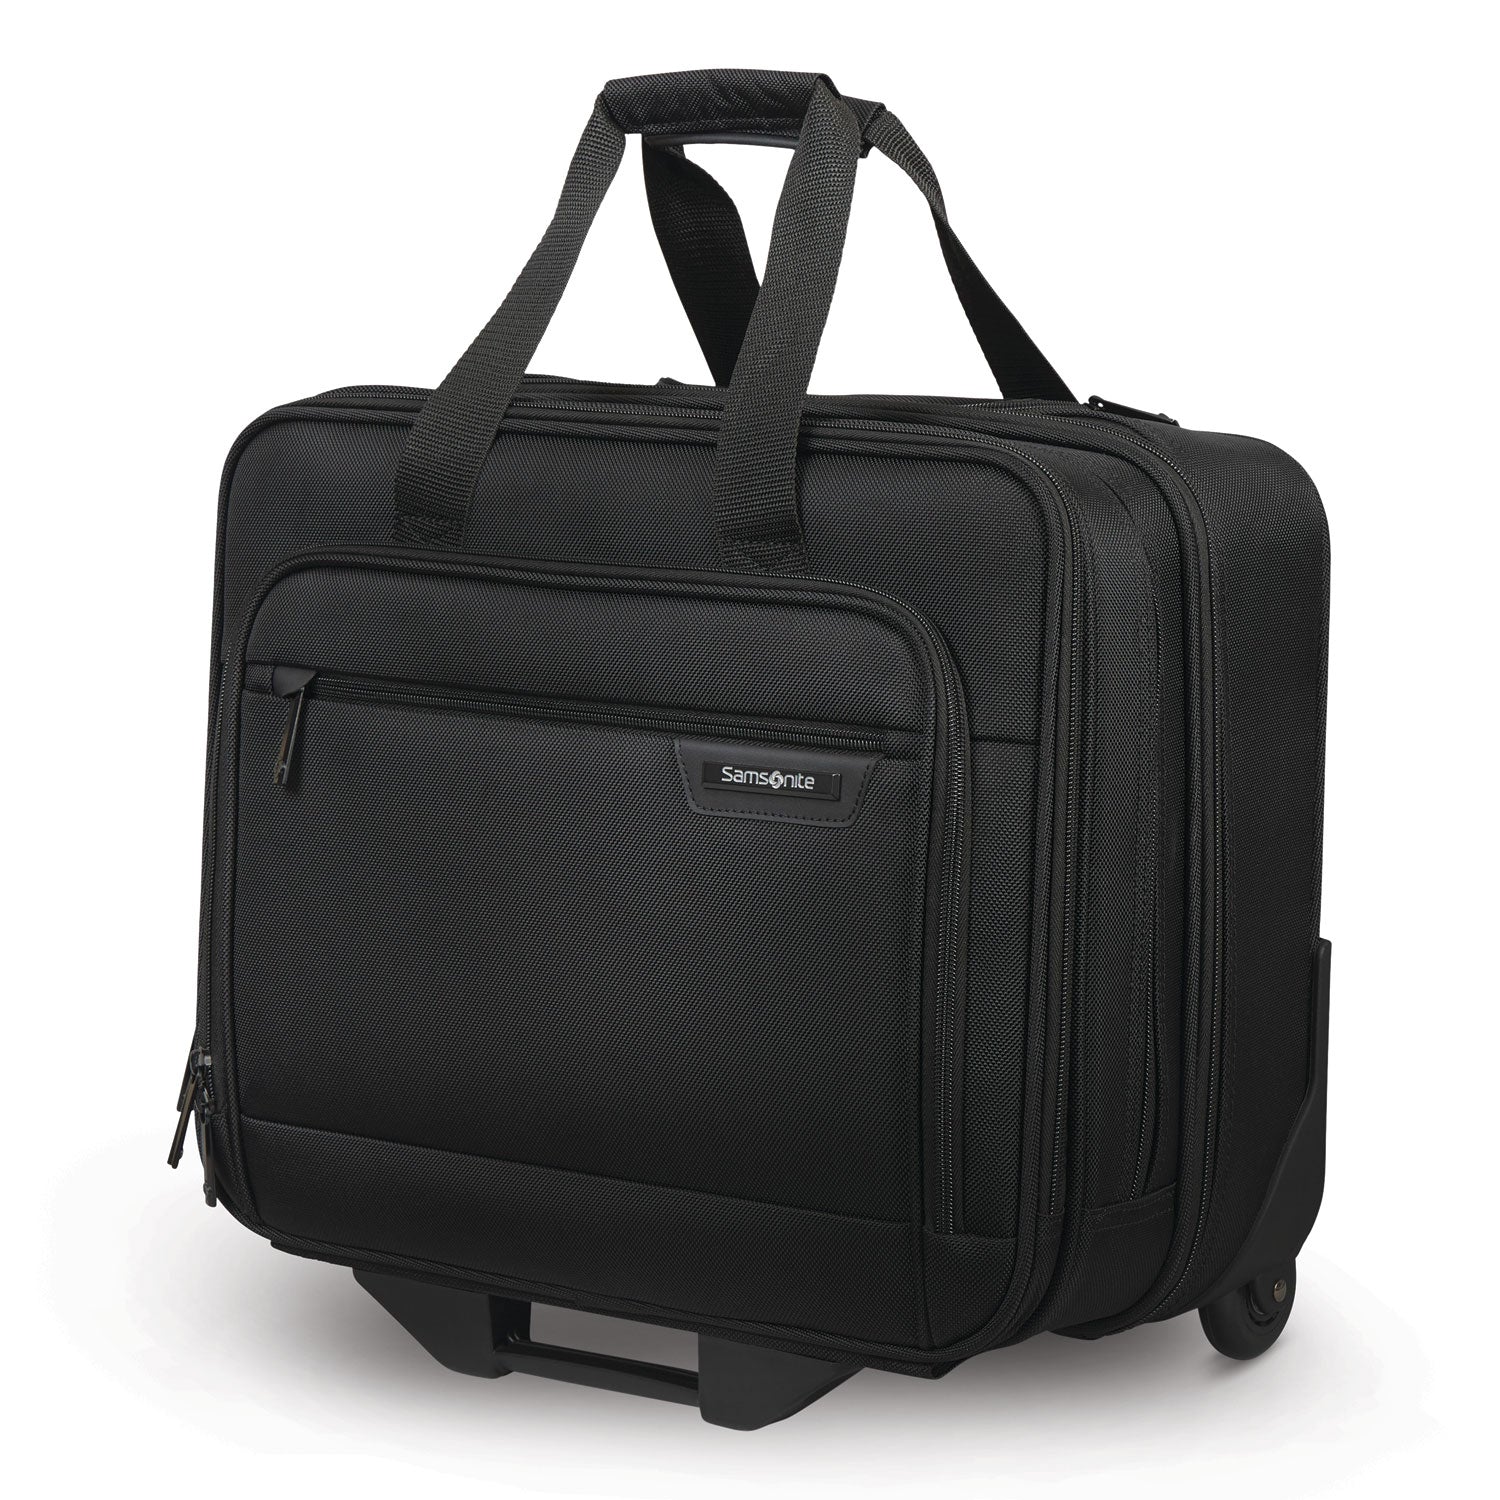 rolling-business-case-fits-devices-up-to-156-polyester-1654-x-8-x-906-black_sml1412781041 - 1